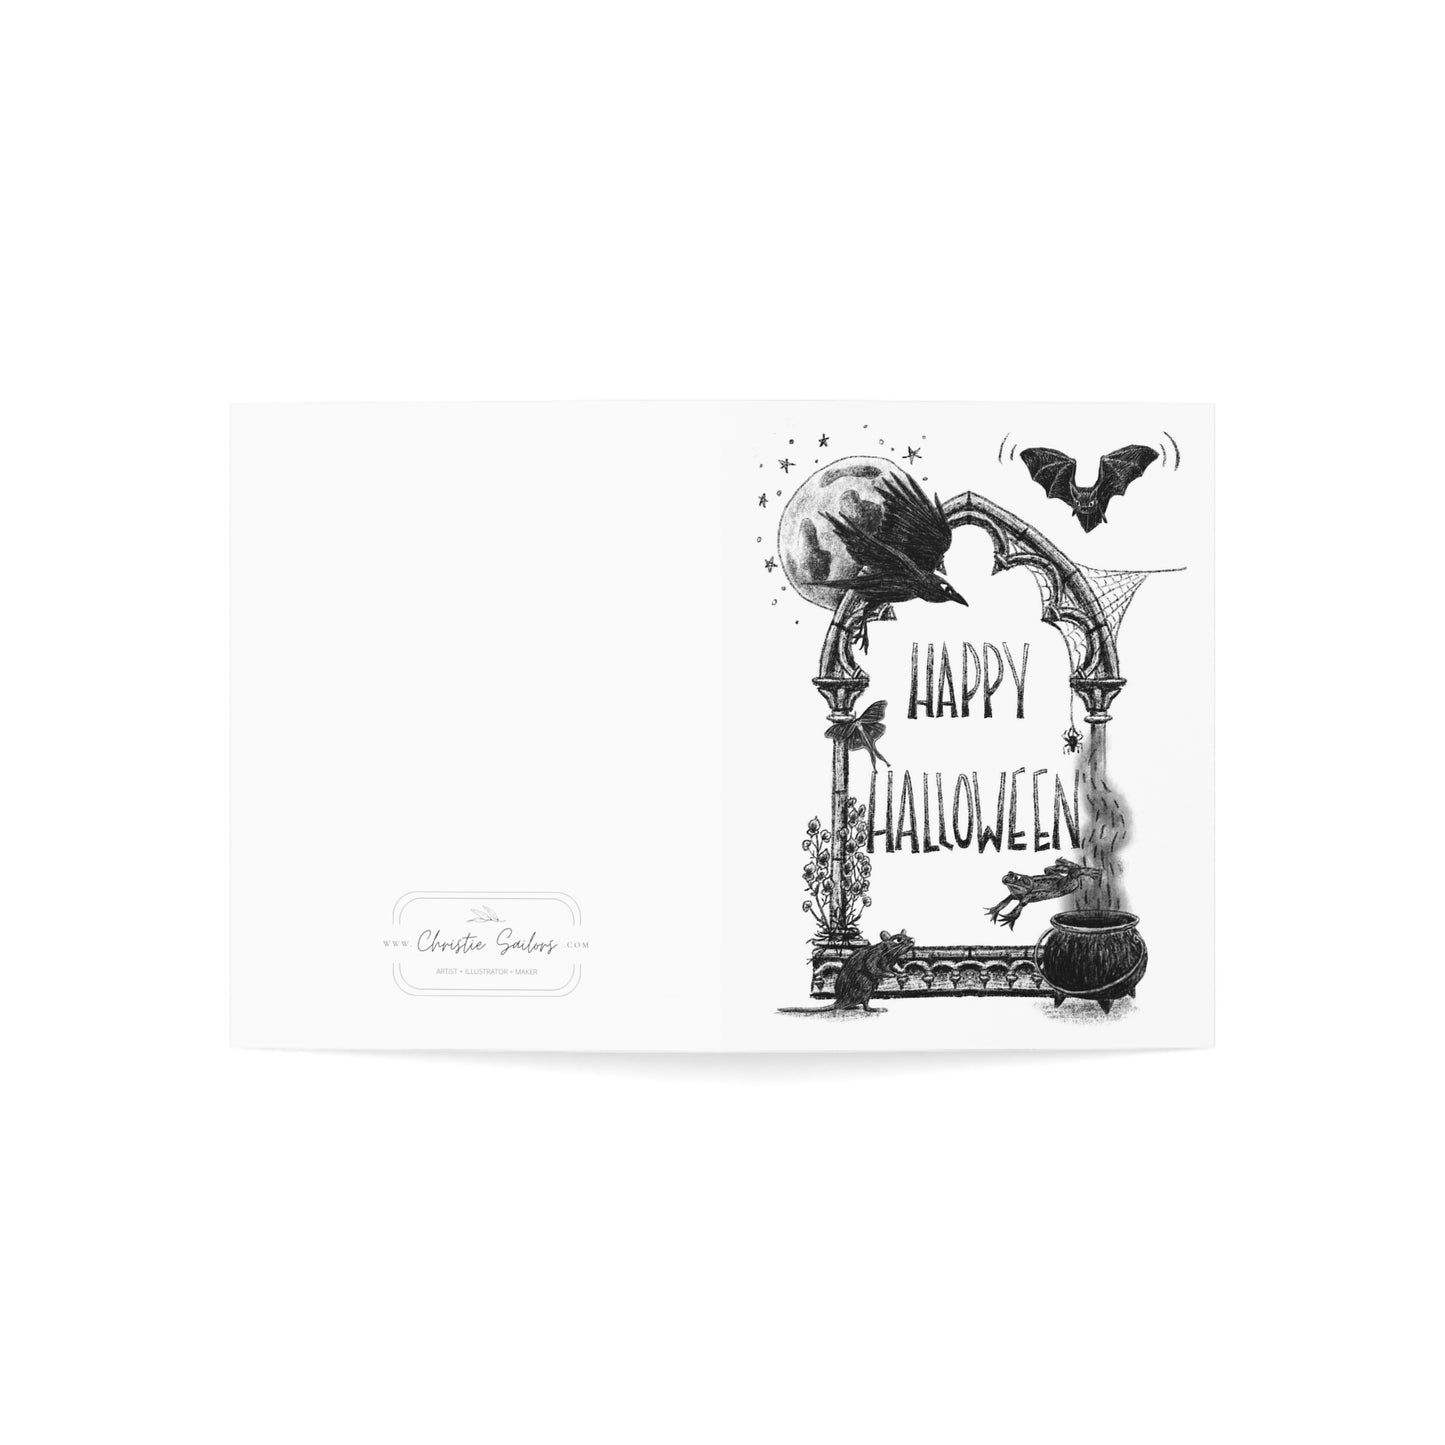 Happy Halloween Greeting Cards (1, 10, 30, and 50pcs)